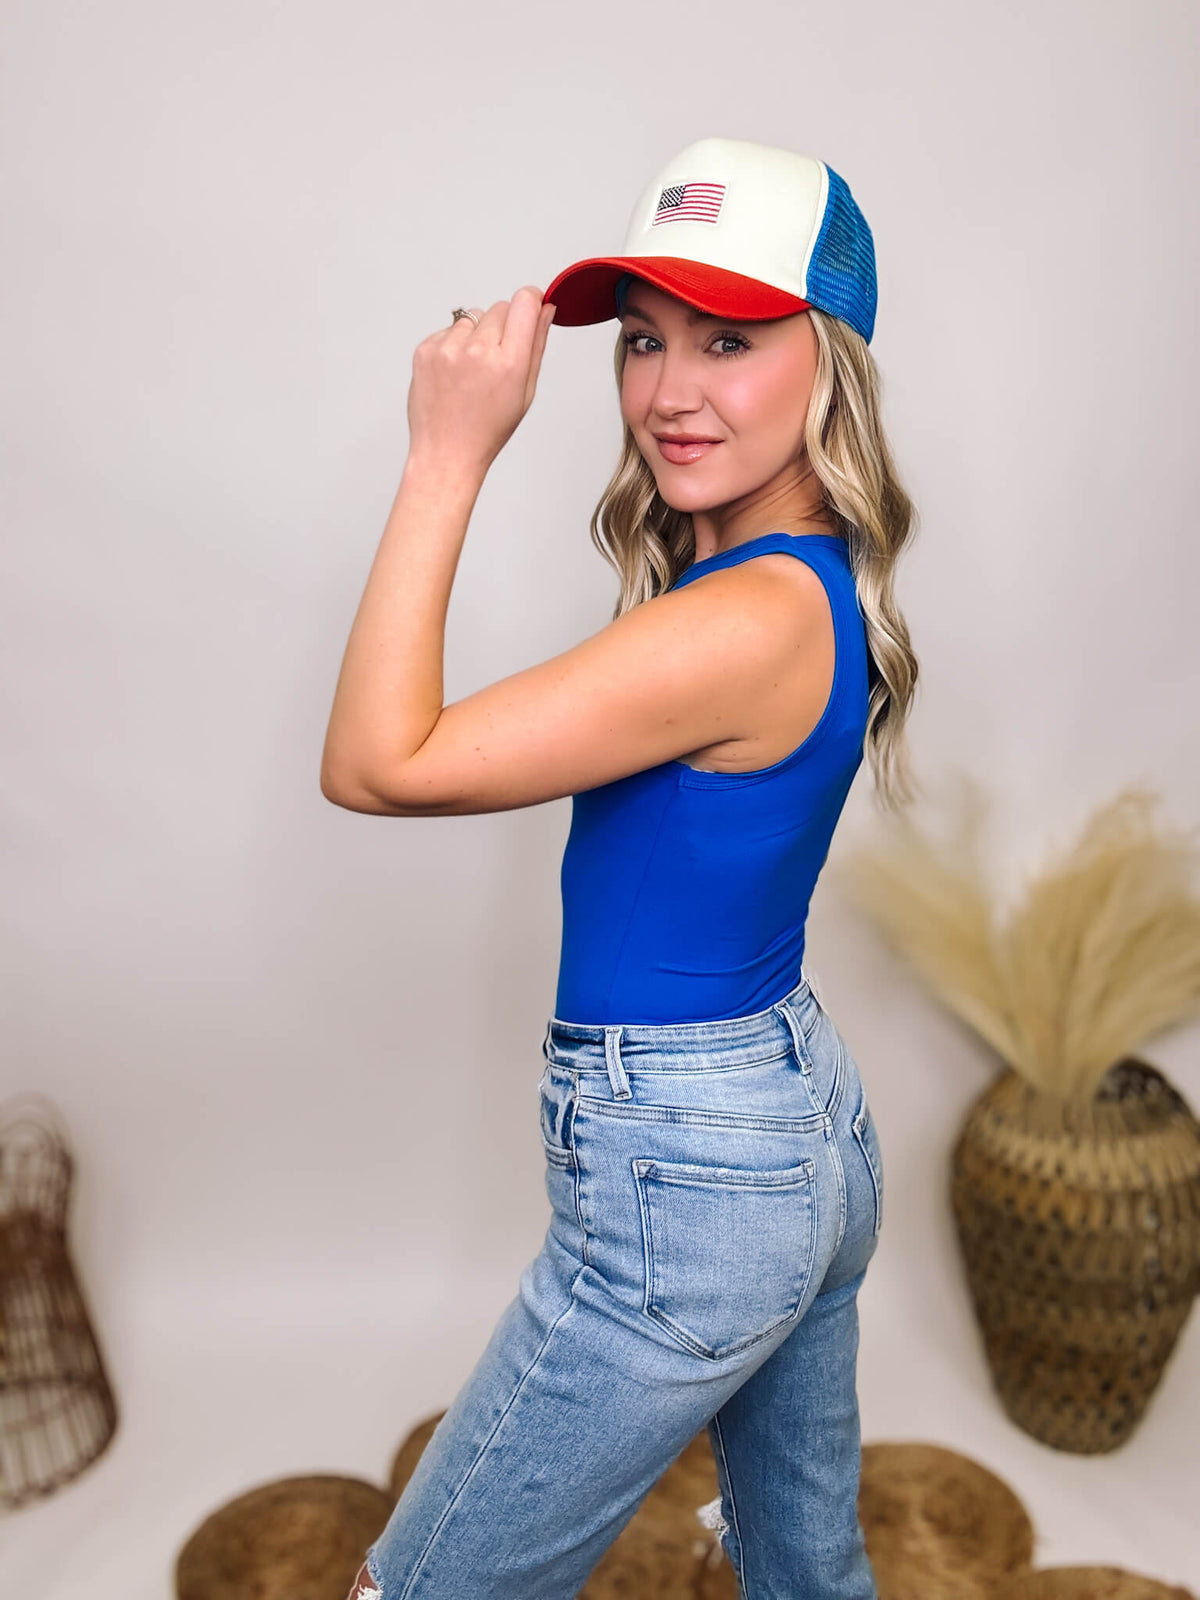 Zenana Blue Boat Neck Sleeveless Tank Bodysuit made from soft, comfortable fabric, perfect for versatile styling and pairing with the Red, White, and Blue American Flag Embroidered Trucker Hat